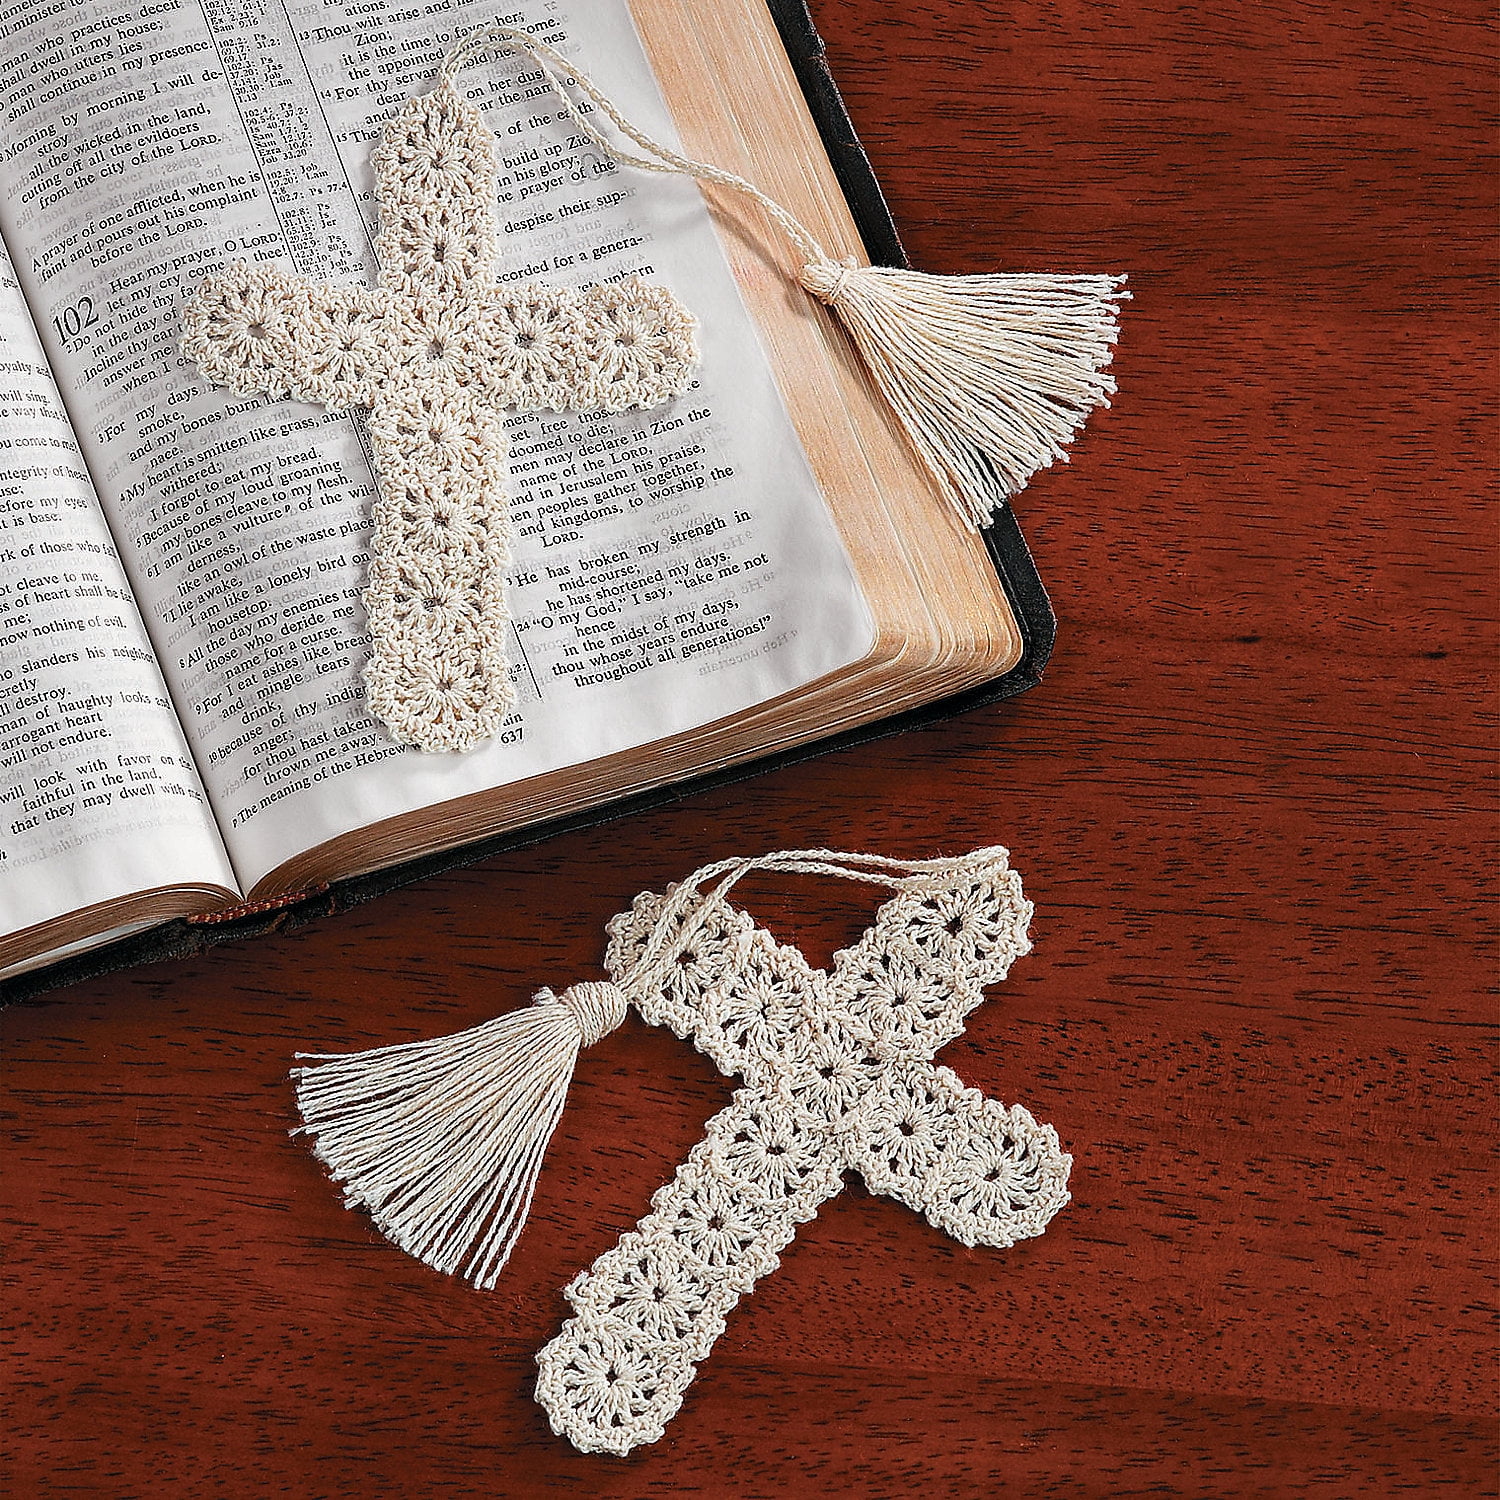 crocheted-cross-bookmarks-free-video-tutorial-this-bookmark-is